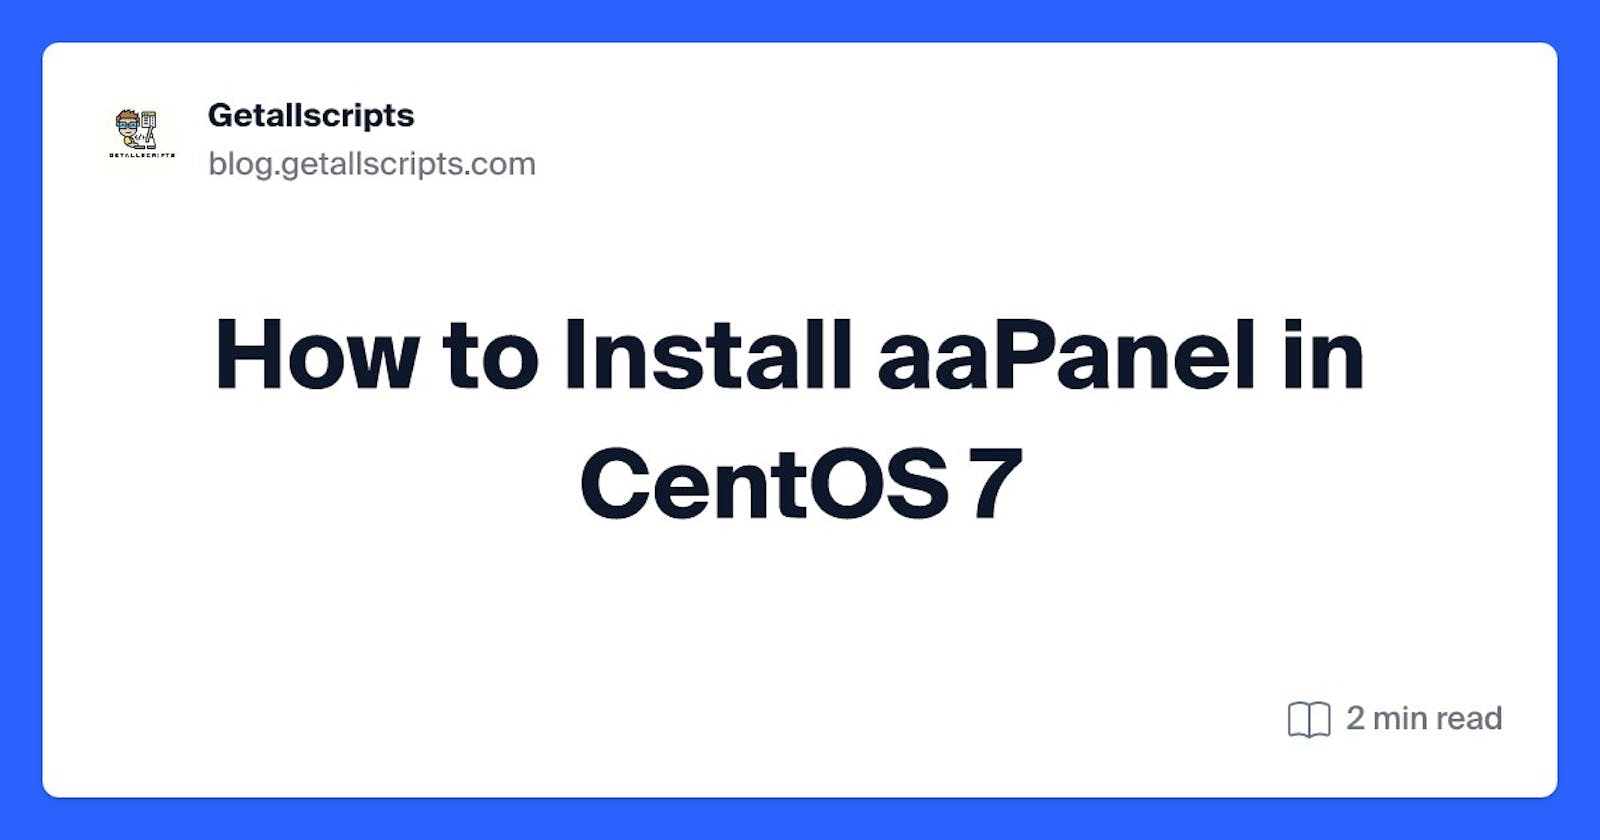 How to Install aaPanel in CentOS 7